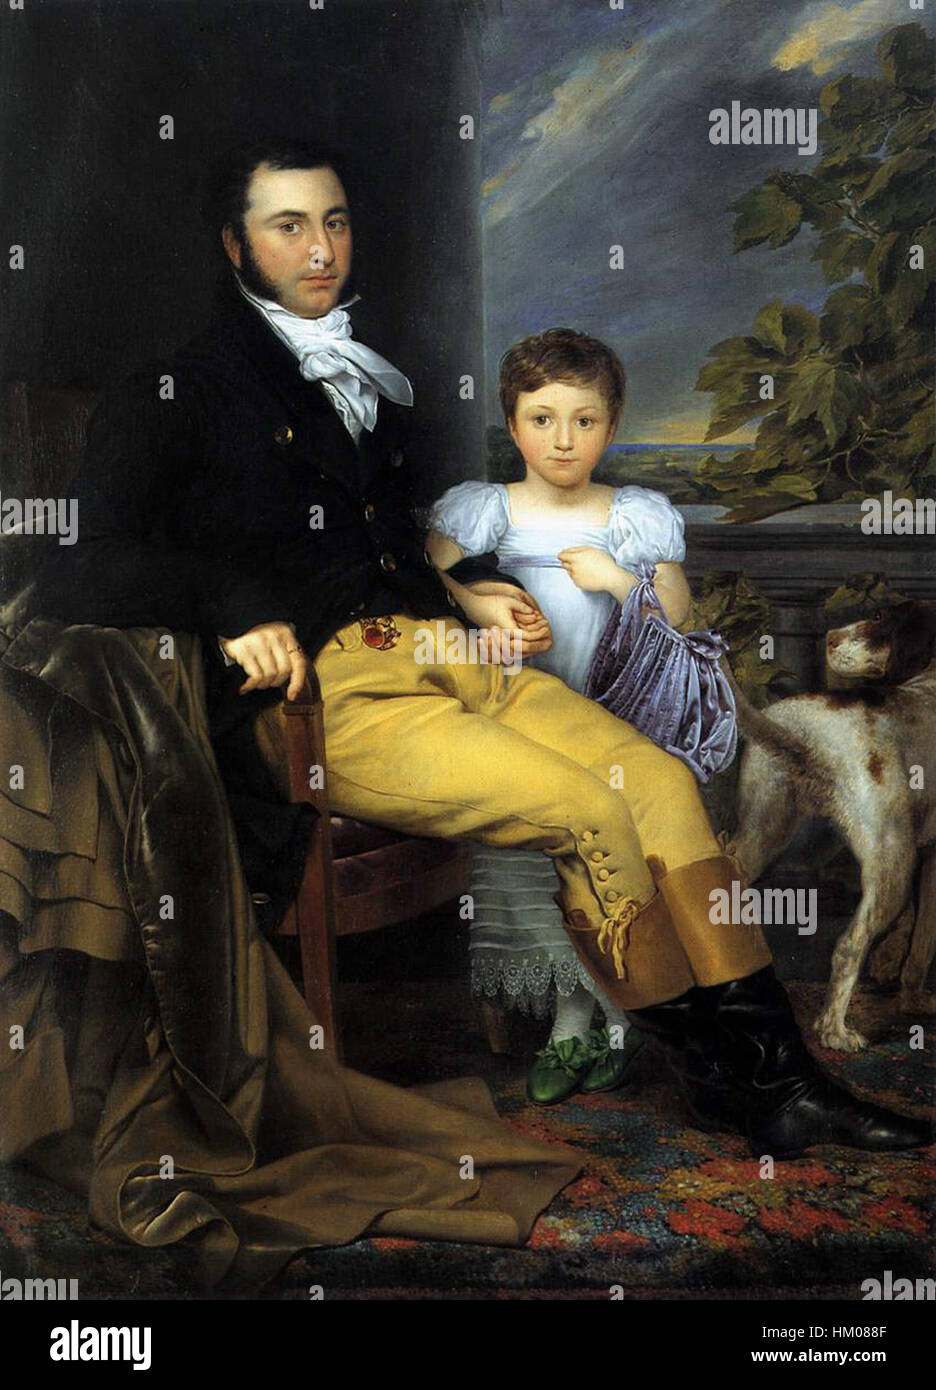 Joseph-Denis Odevaere - Portrait of a Prominent Gentleman with his Daughter and Hunting Dog - WGA16628 Stock Photo